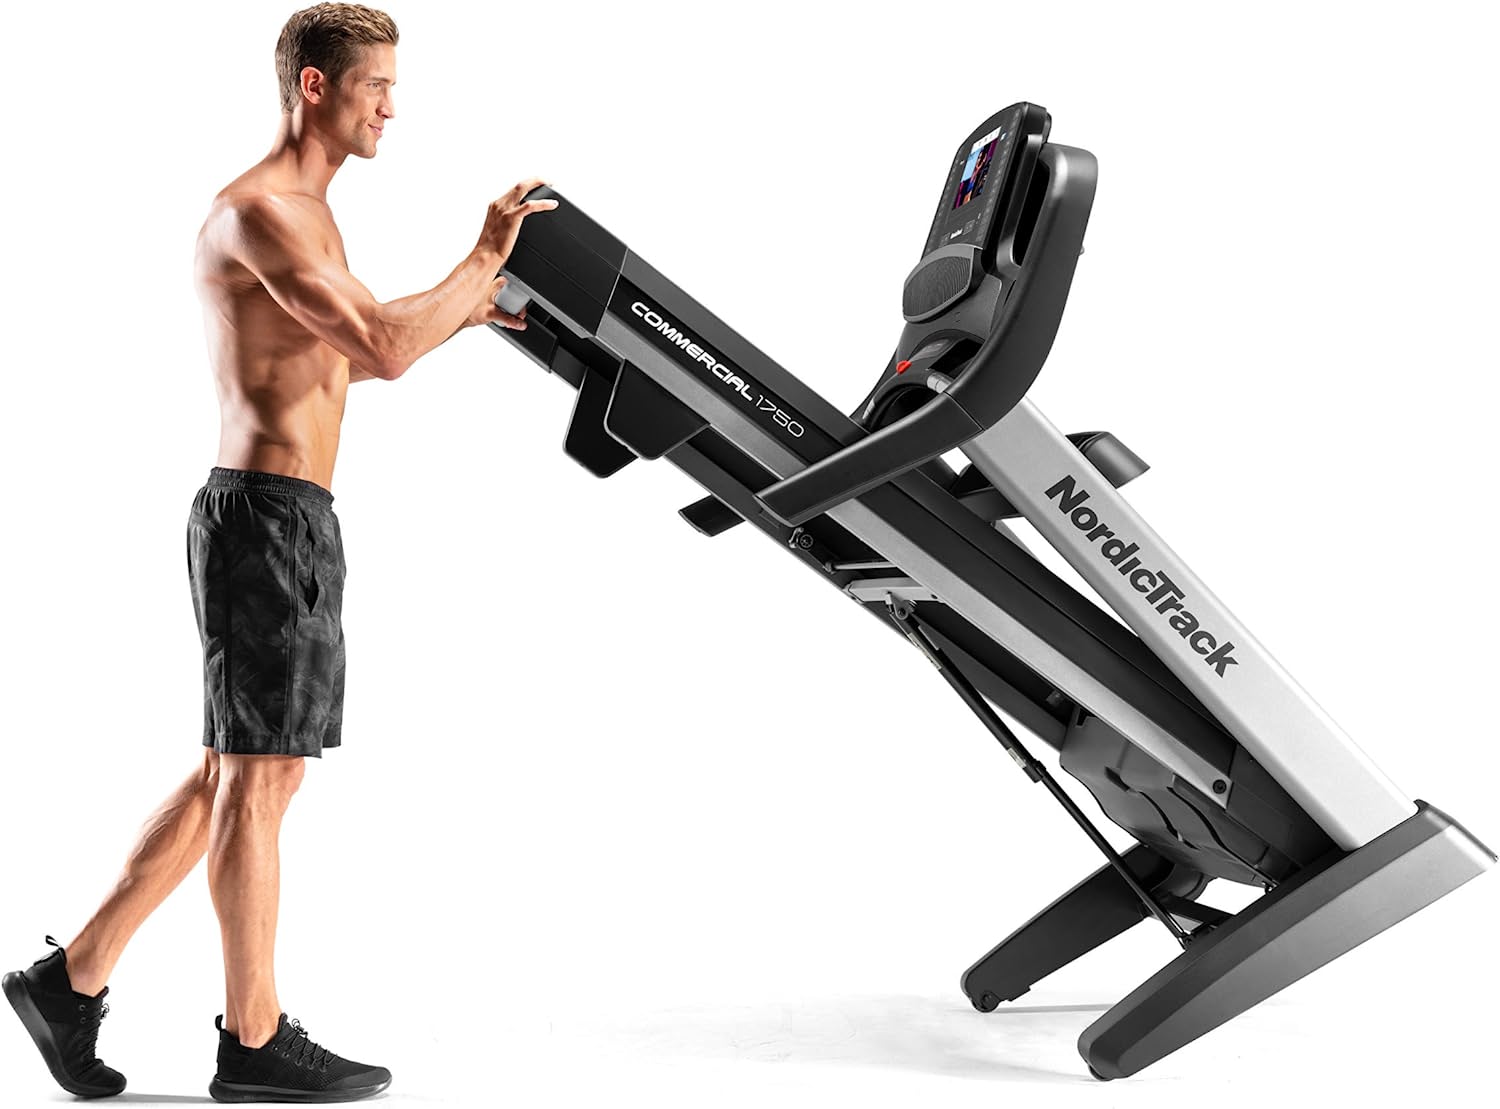 NordicTrack 1750 Treadmill Review